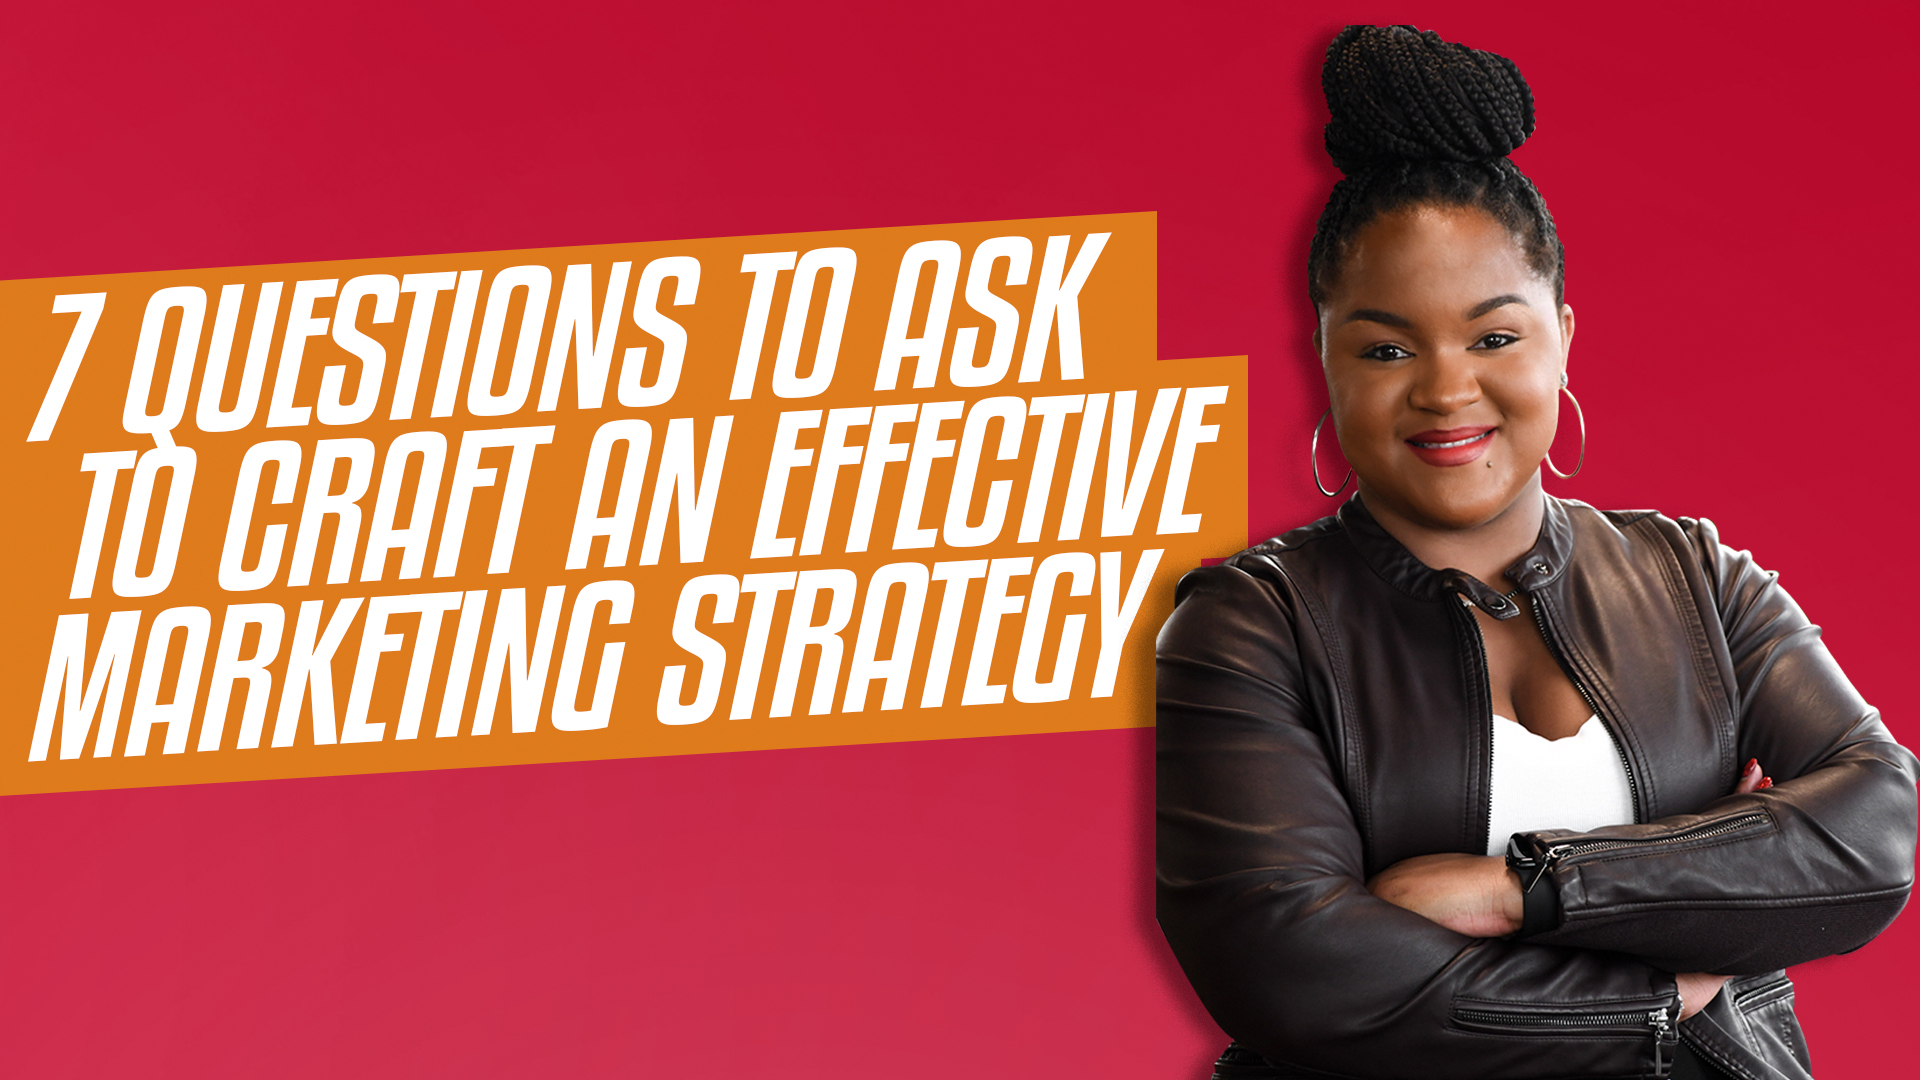 Episode #1: 7 Questions to Ask to Craft an Effective Marketing Strategy